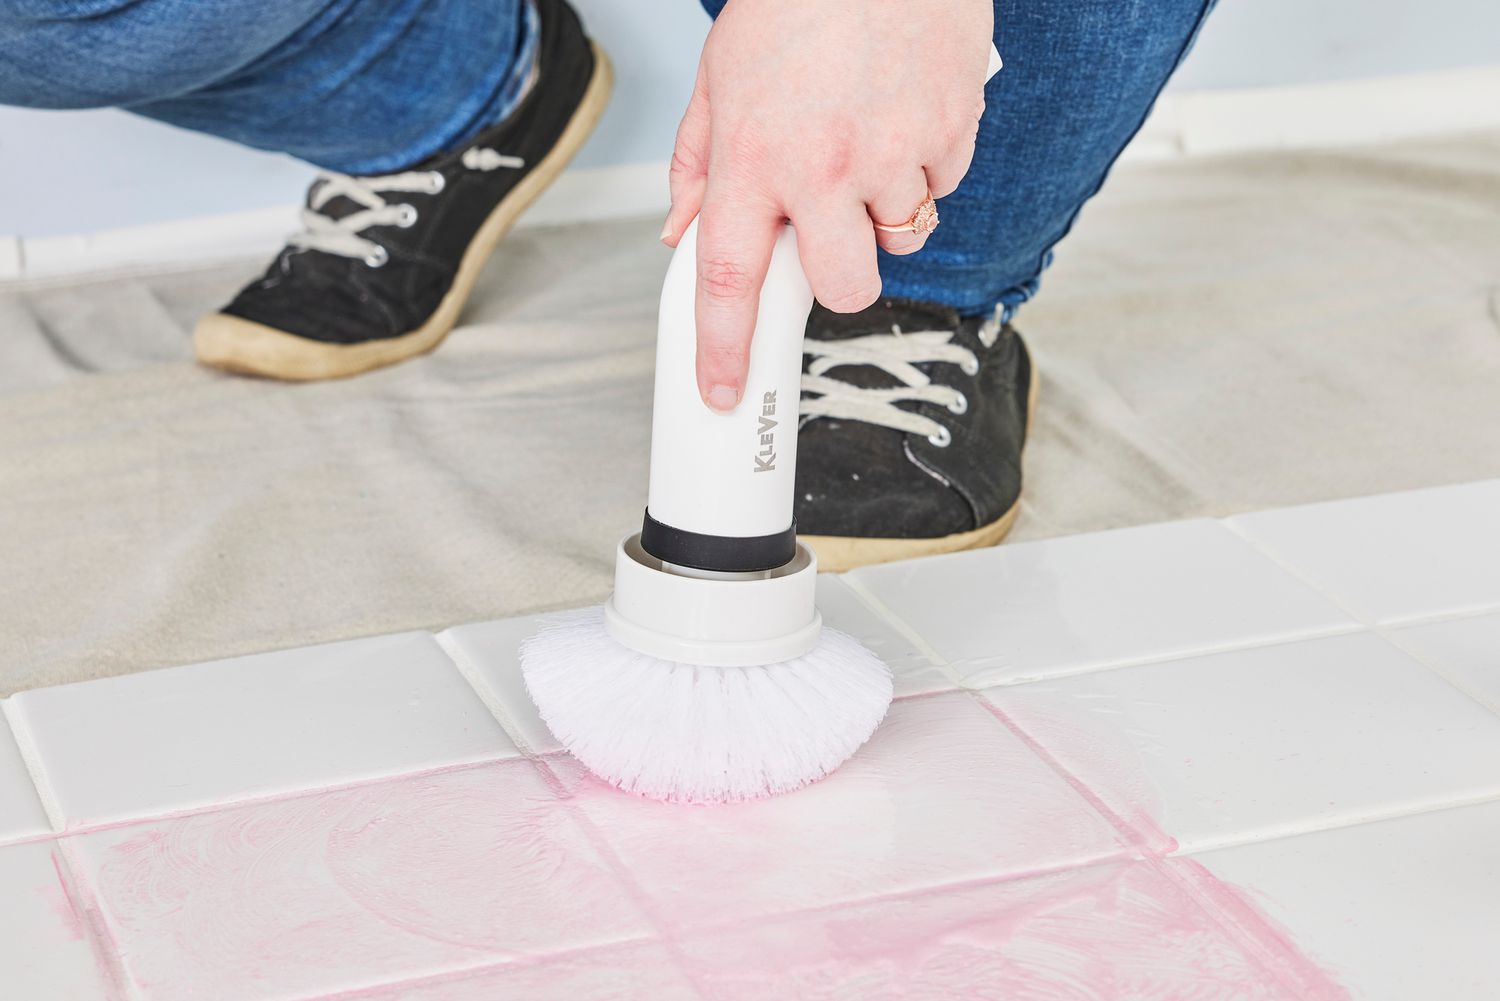 Person cleans white tile stained with red marker with a Klever Electric Spin Scrubber with 8 Brushes